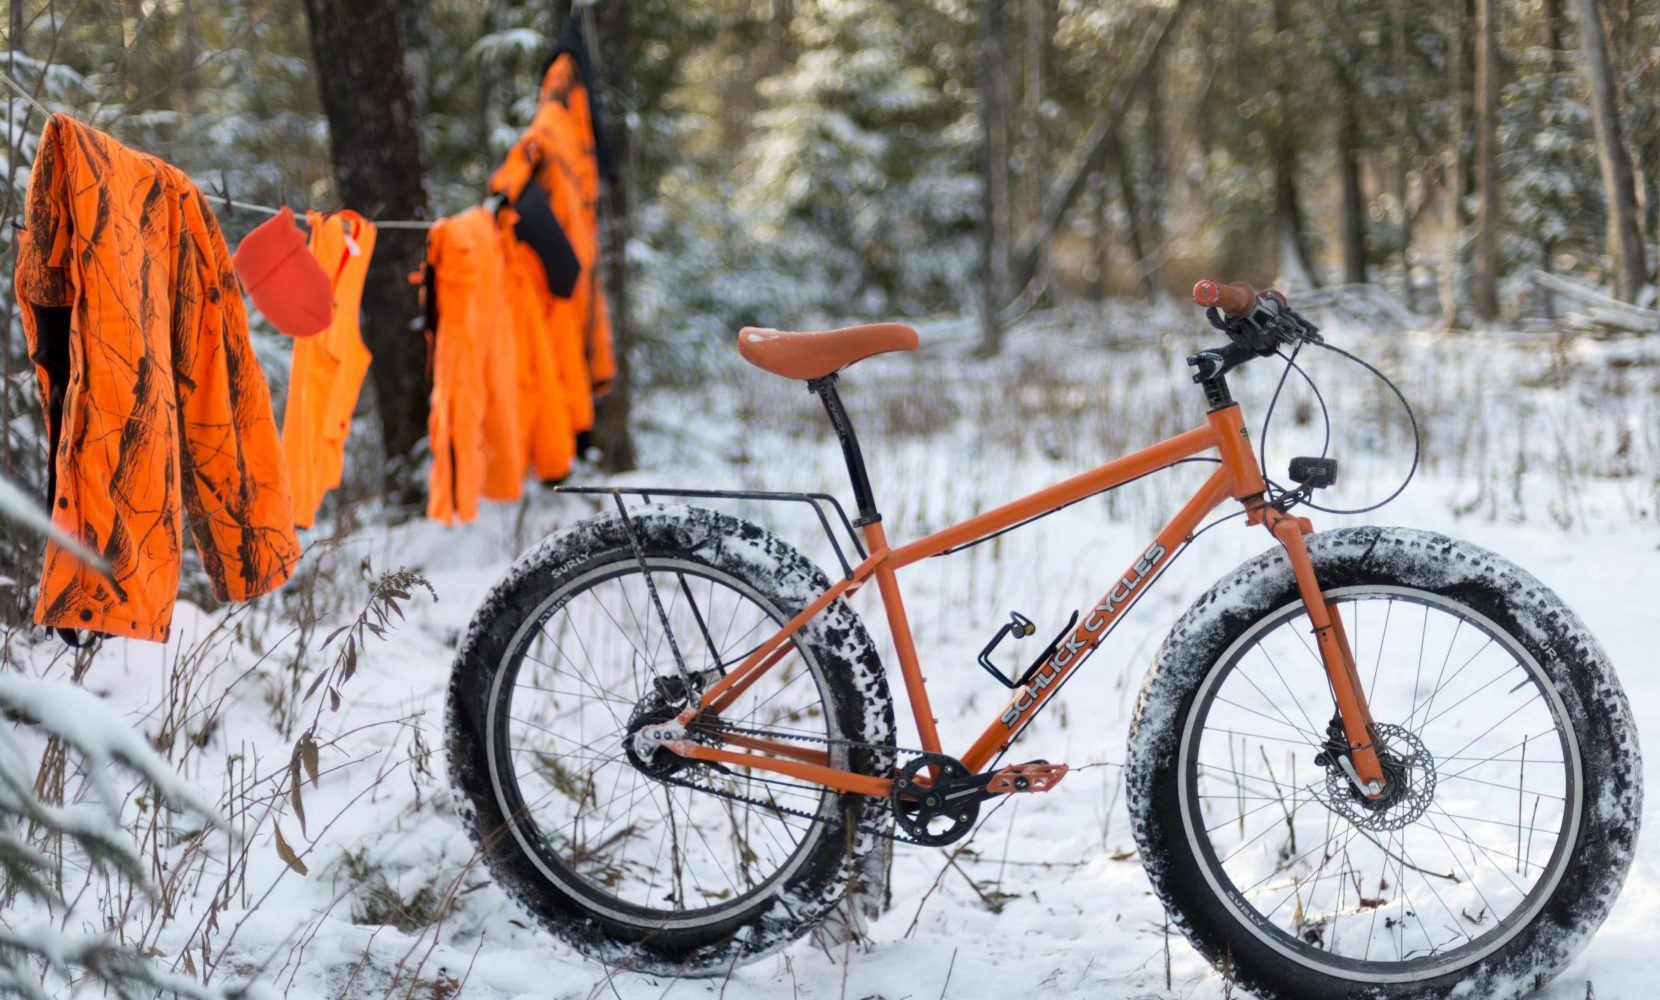 Orange Schlick Northpaw fatbike in snow by deer unting cltohs hangin gon line in woods